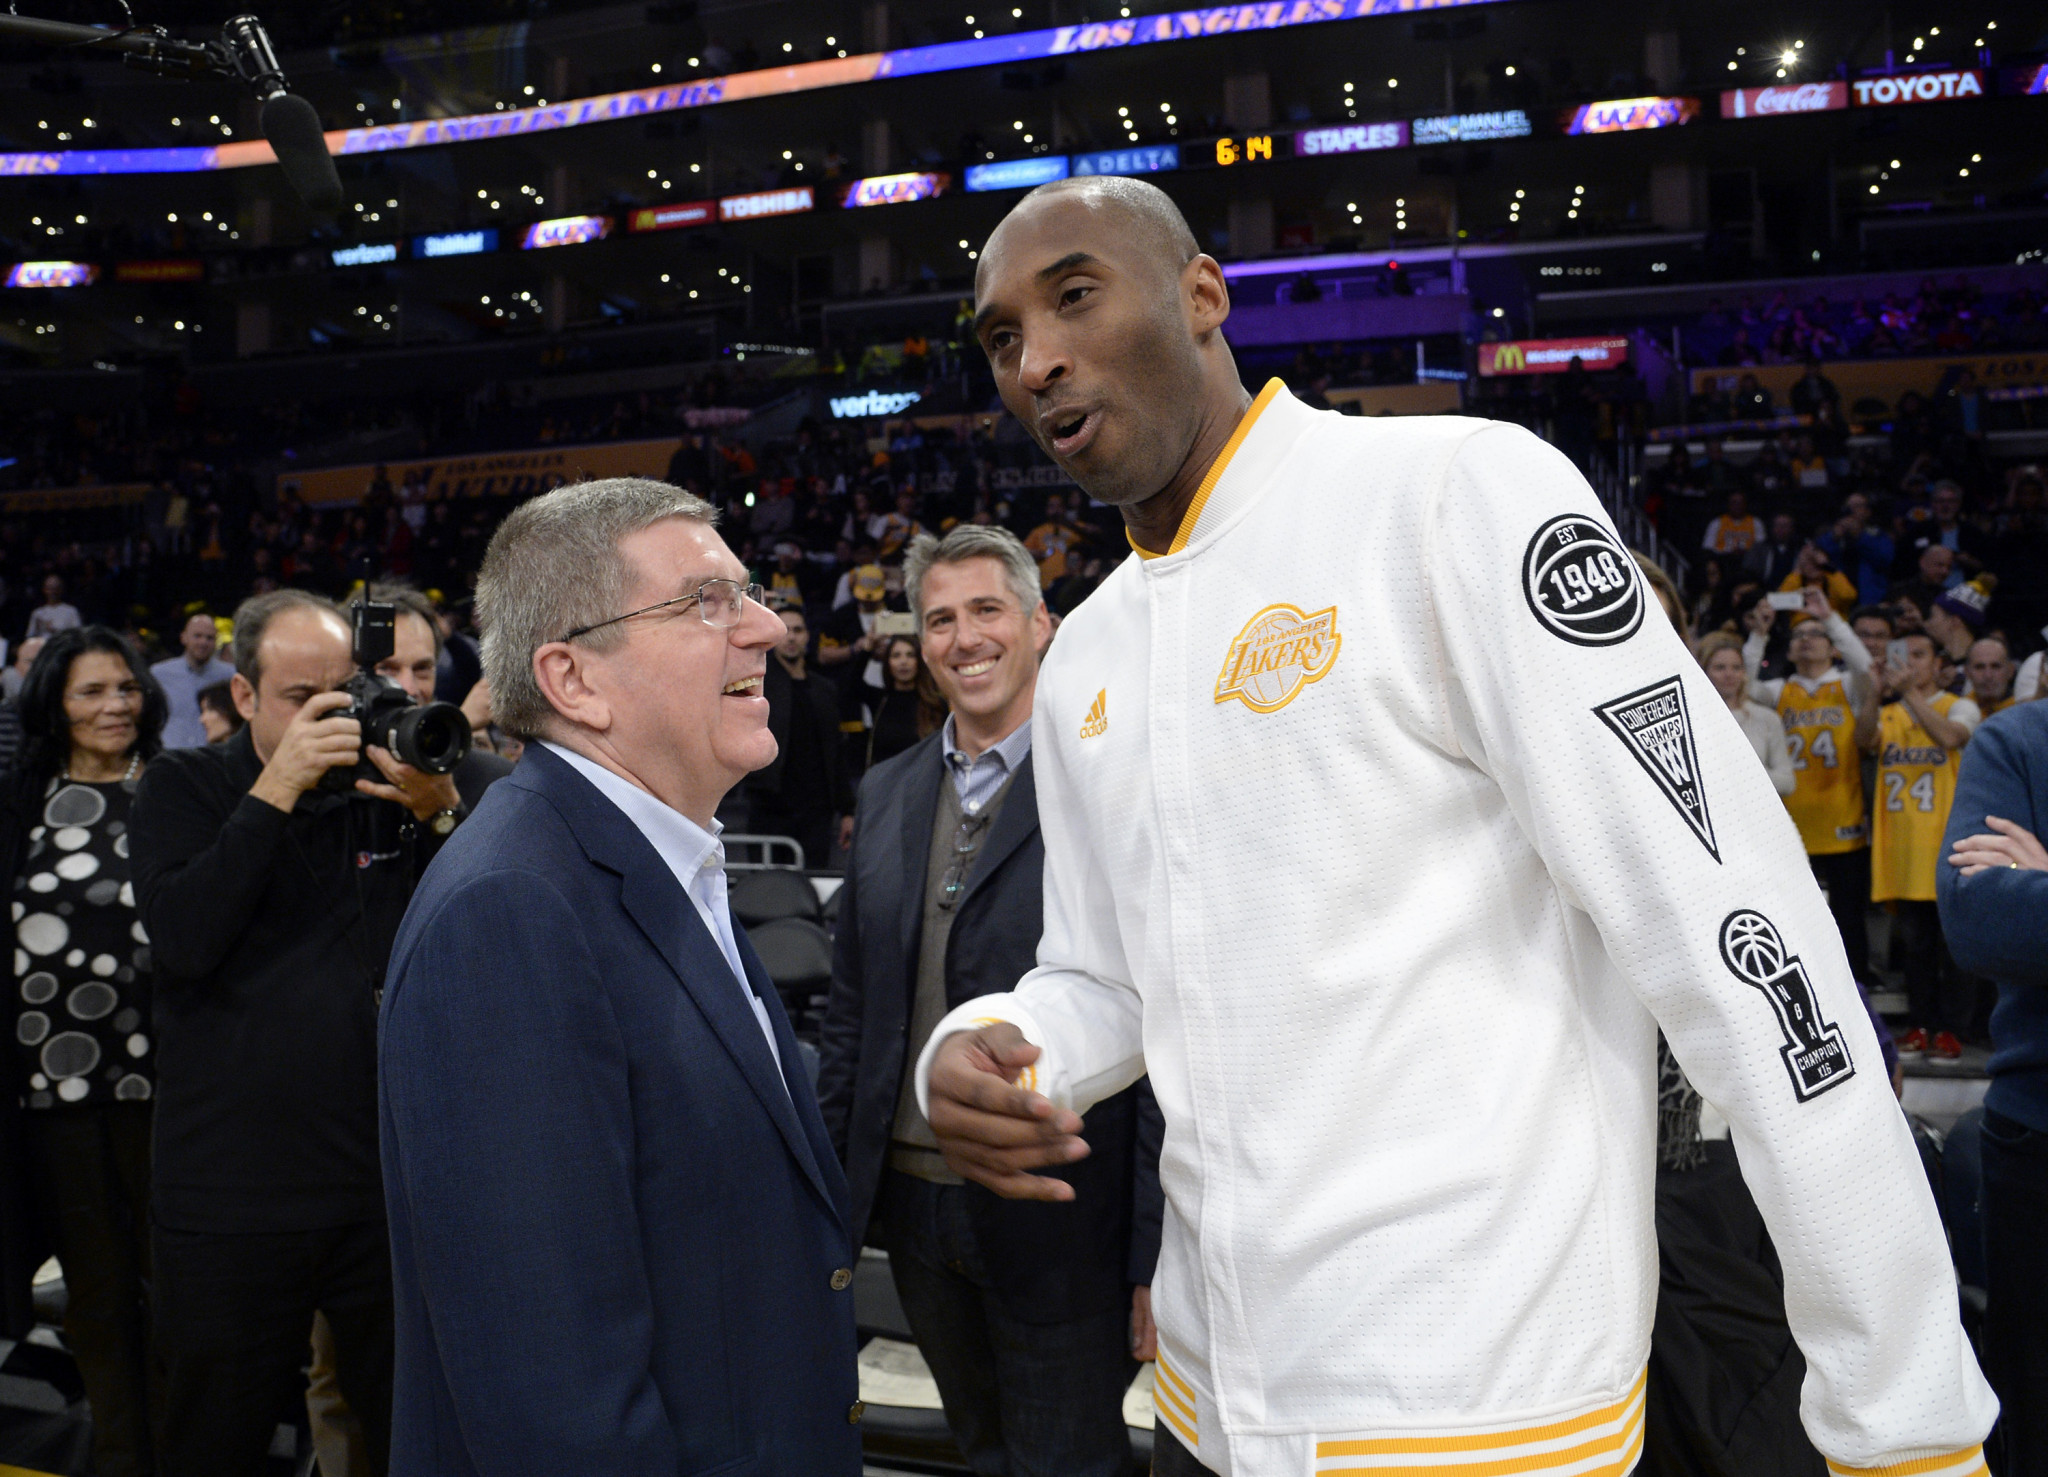 IOC President Thomas Bach paid tribute to America's double Olympic basketball gold medallist Kobe Bryant ©Getty Images